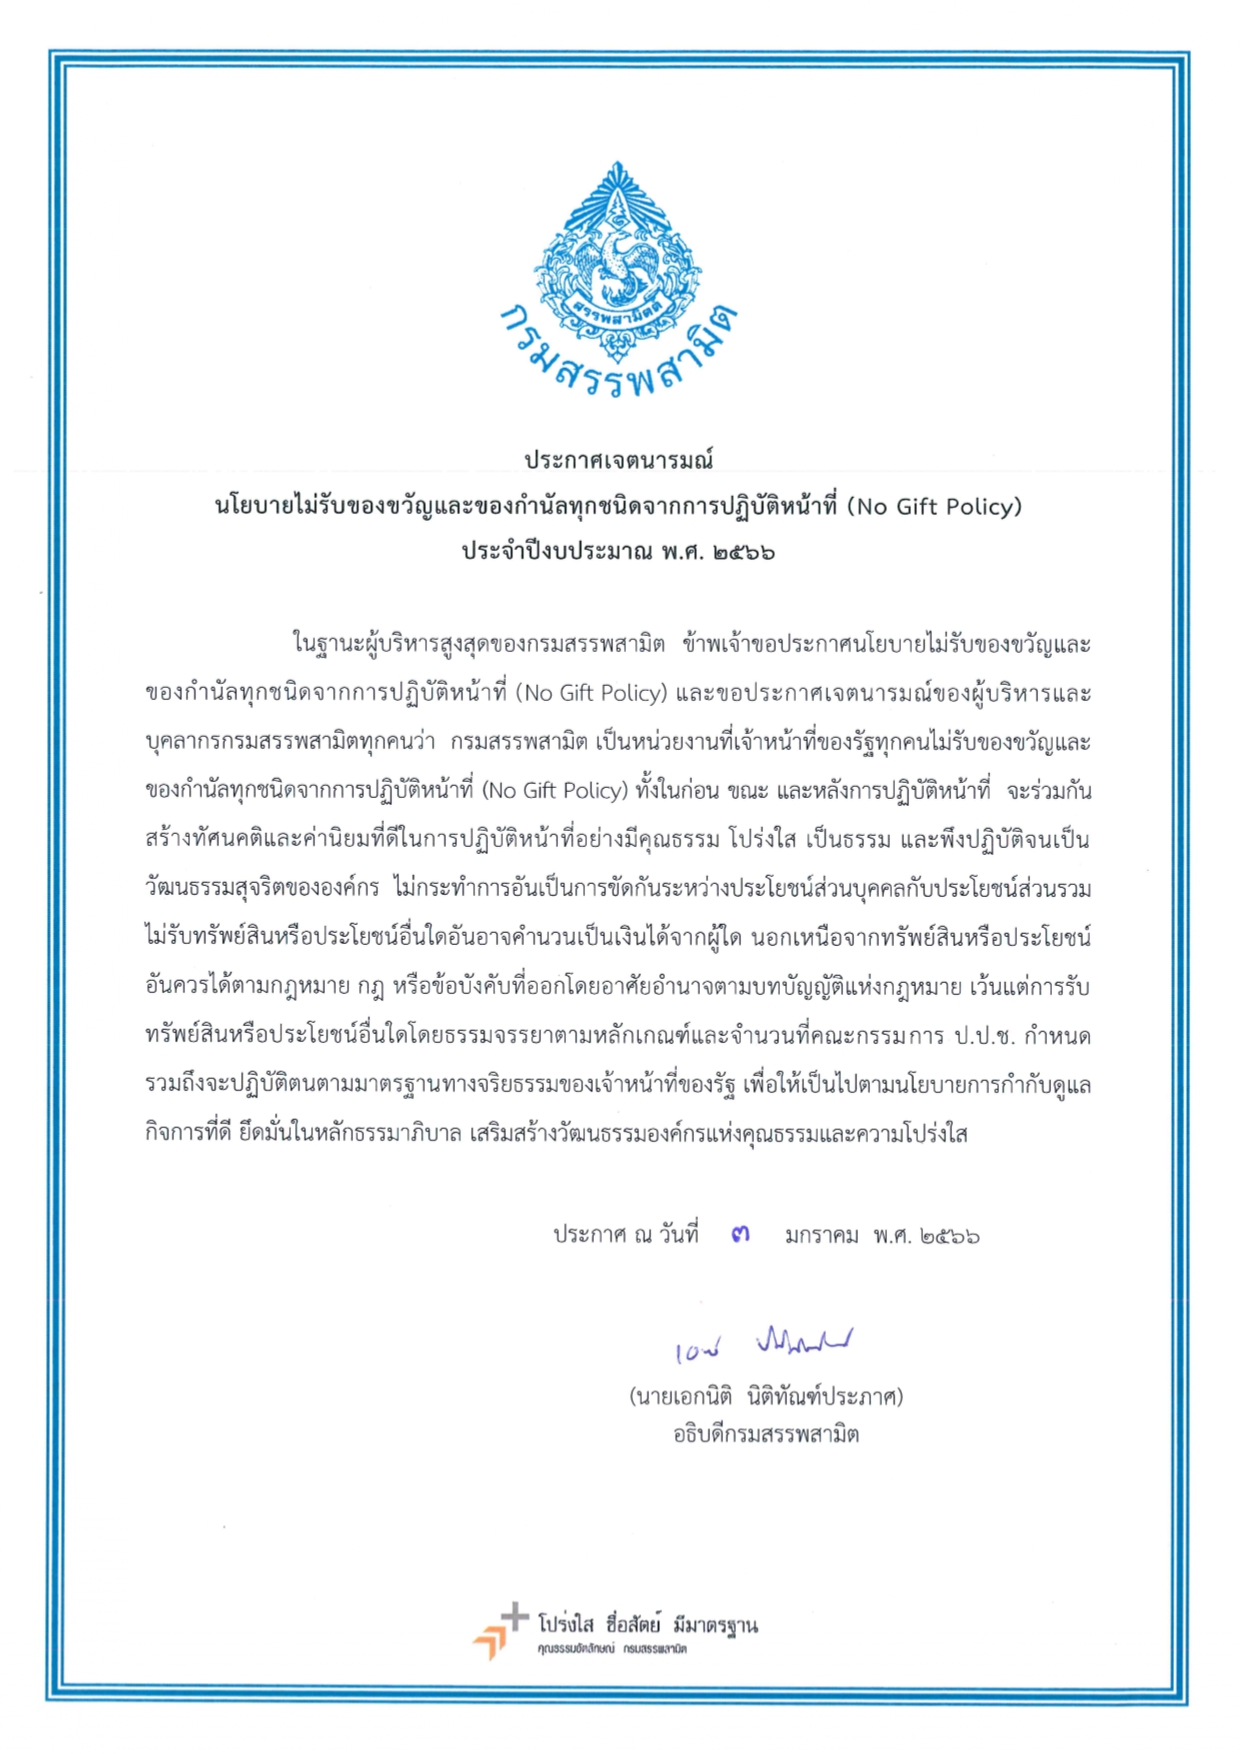 No Gift Policy ปี 66.jpg